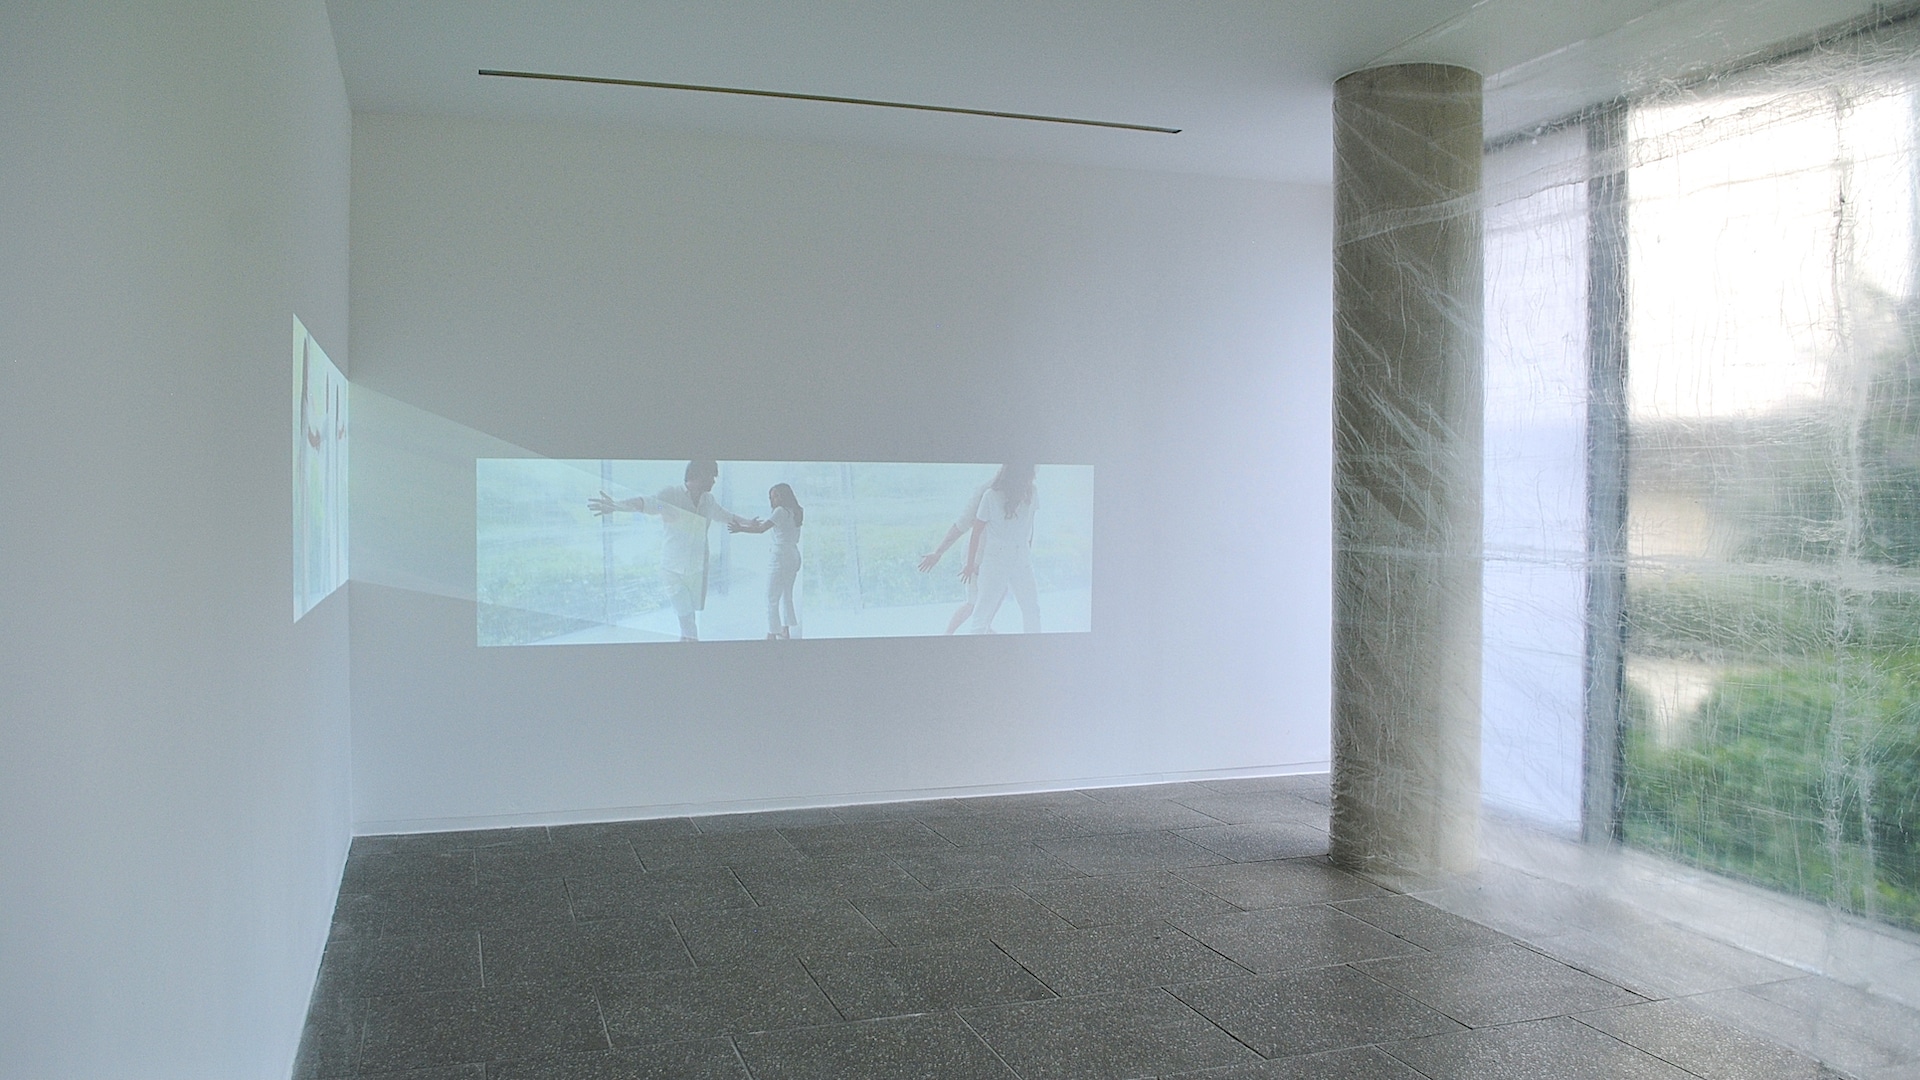 Cos Ahmet, A Meniscus Between, 2021 - Installation view. Two channel digital video projection, 5 mins 2 secs, audio, choreographic object, clear tape. Dimensions variable.